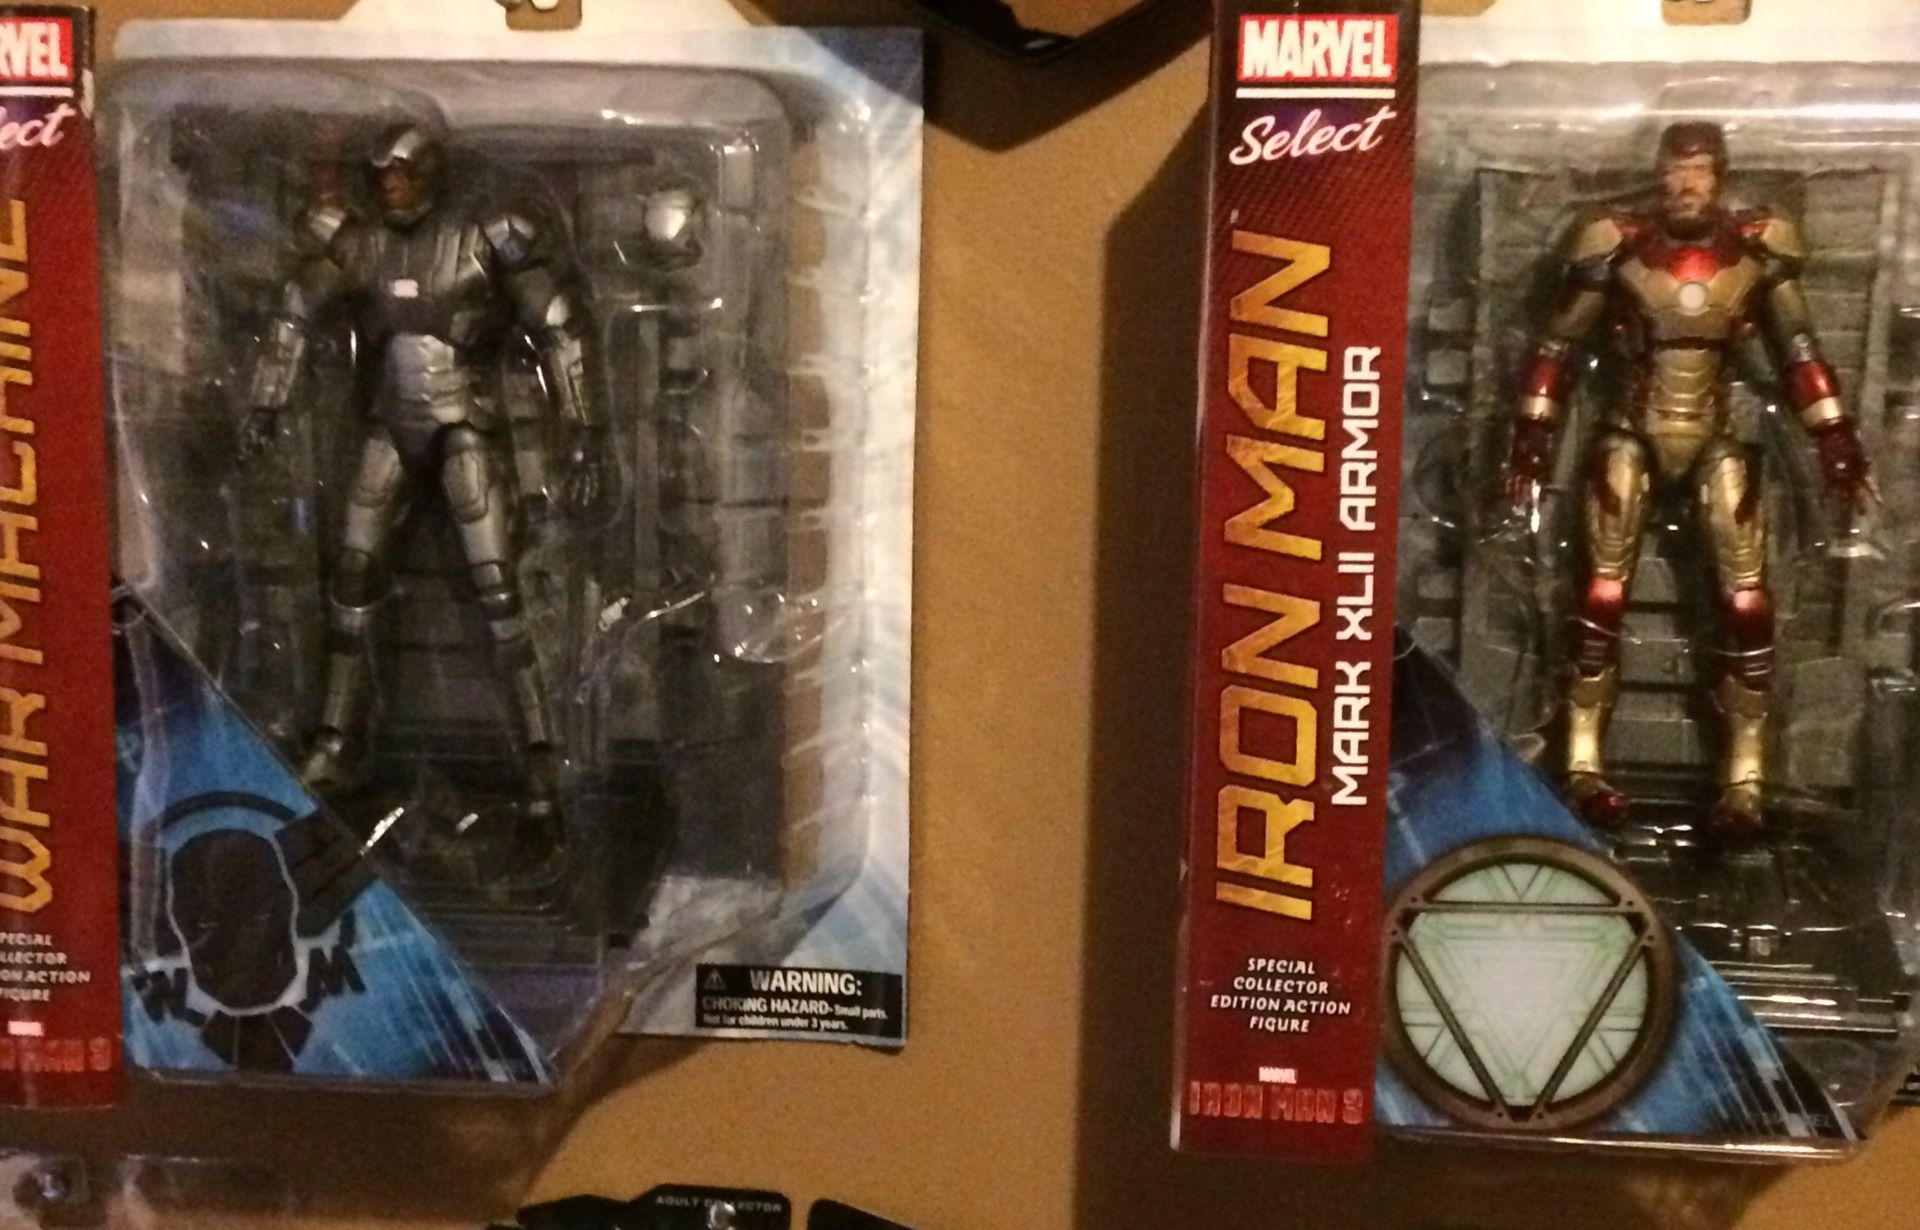 Iron man 3 and war machine marvel select action figures